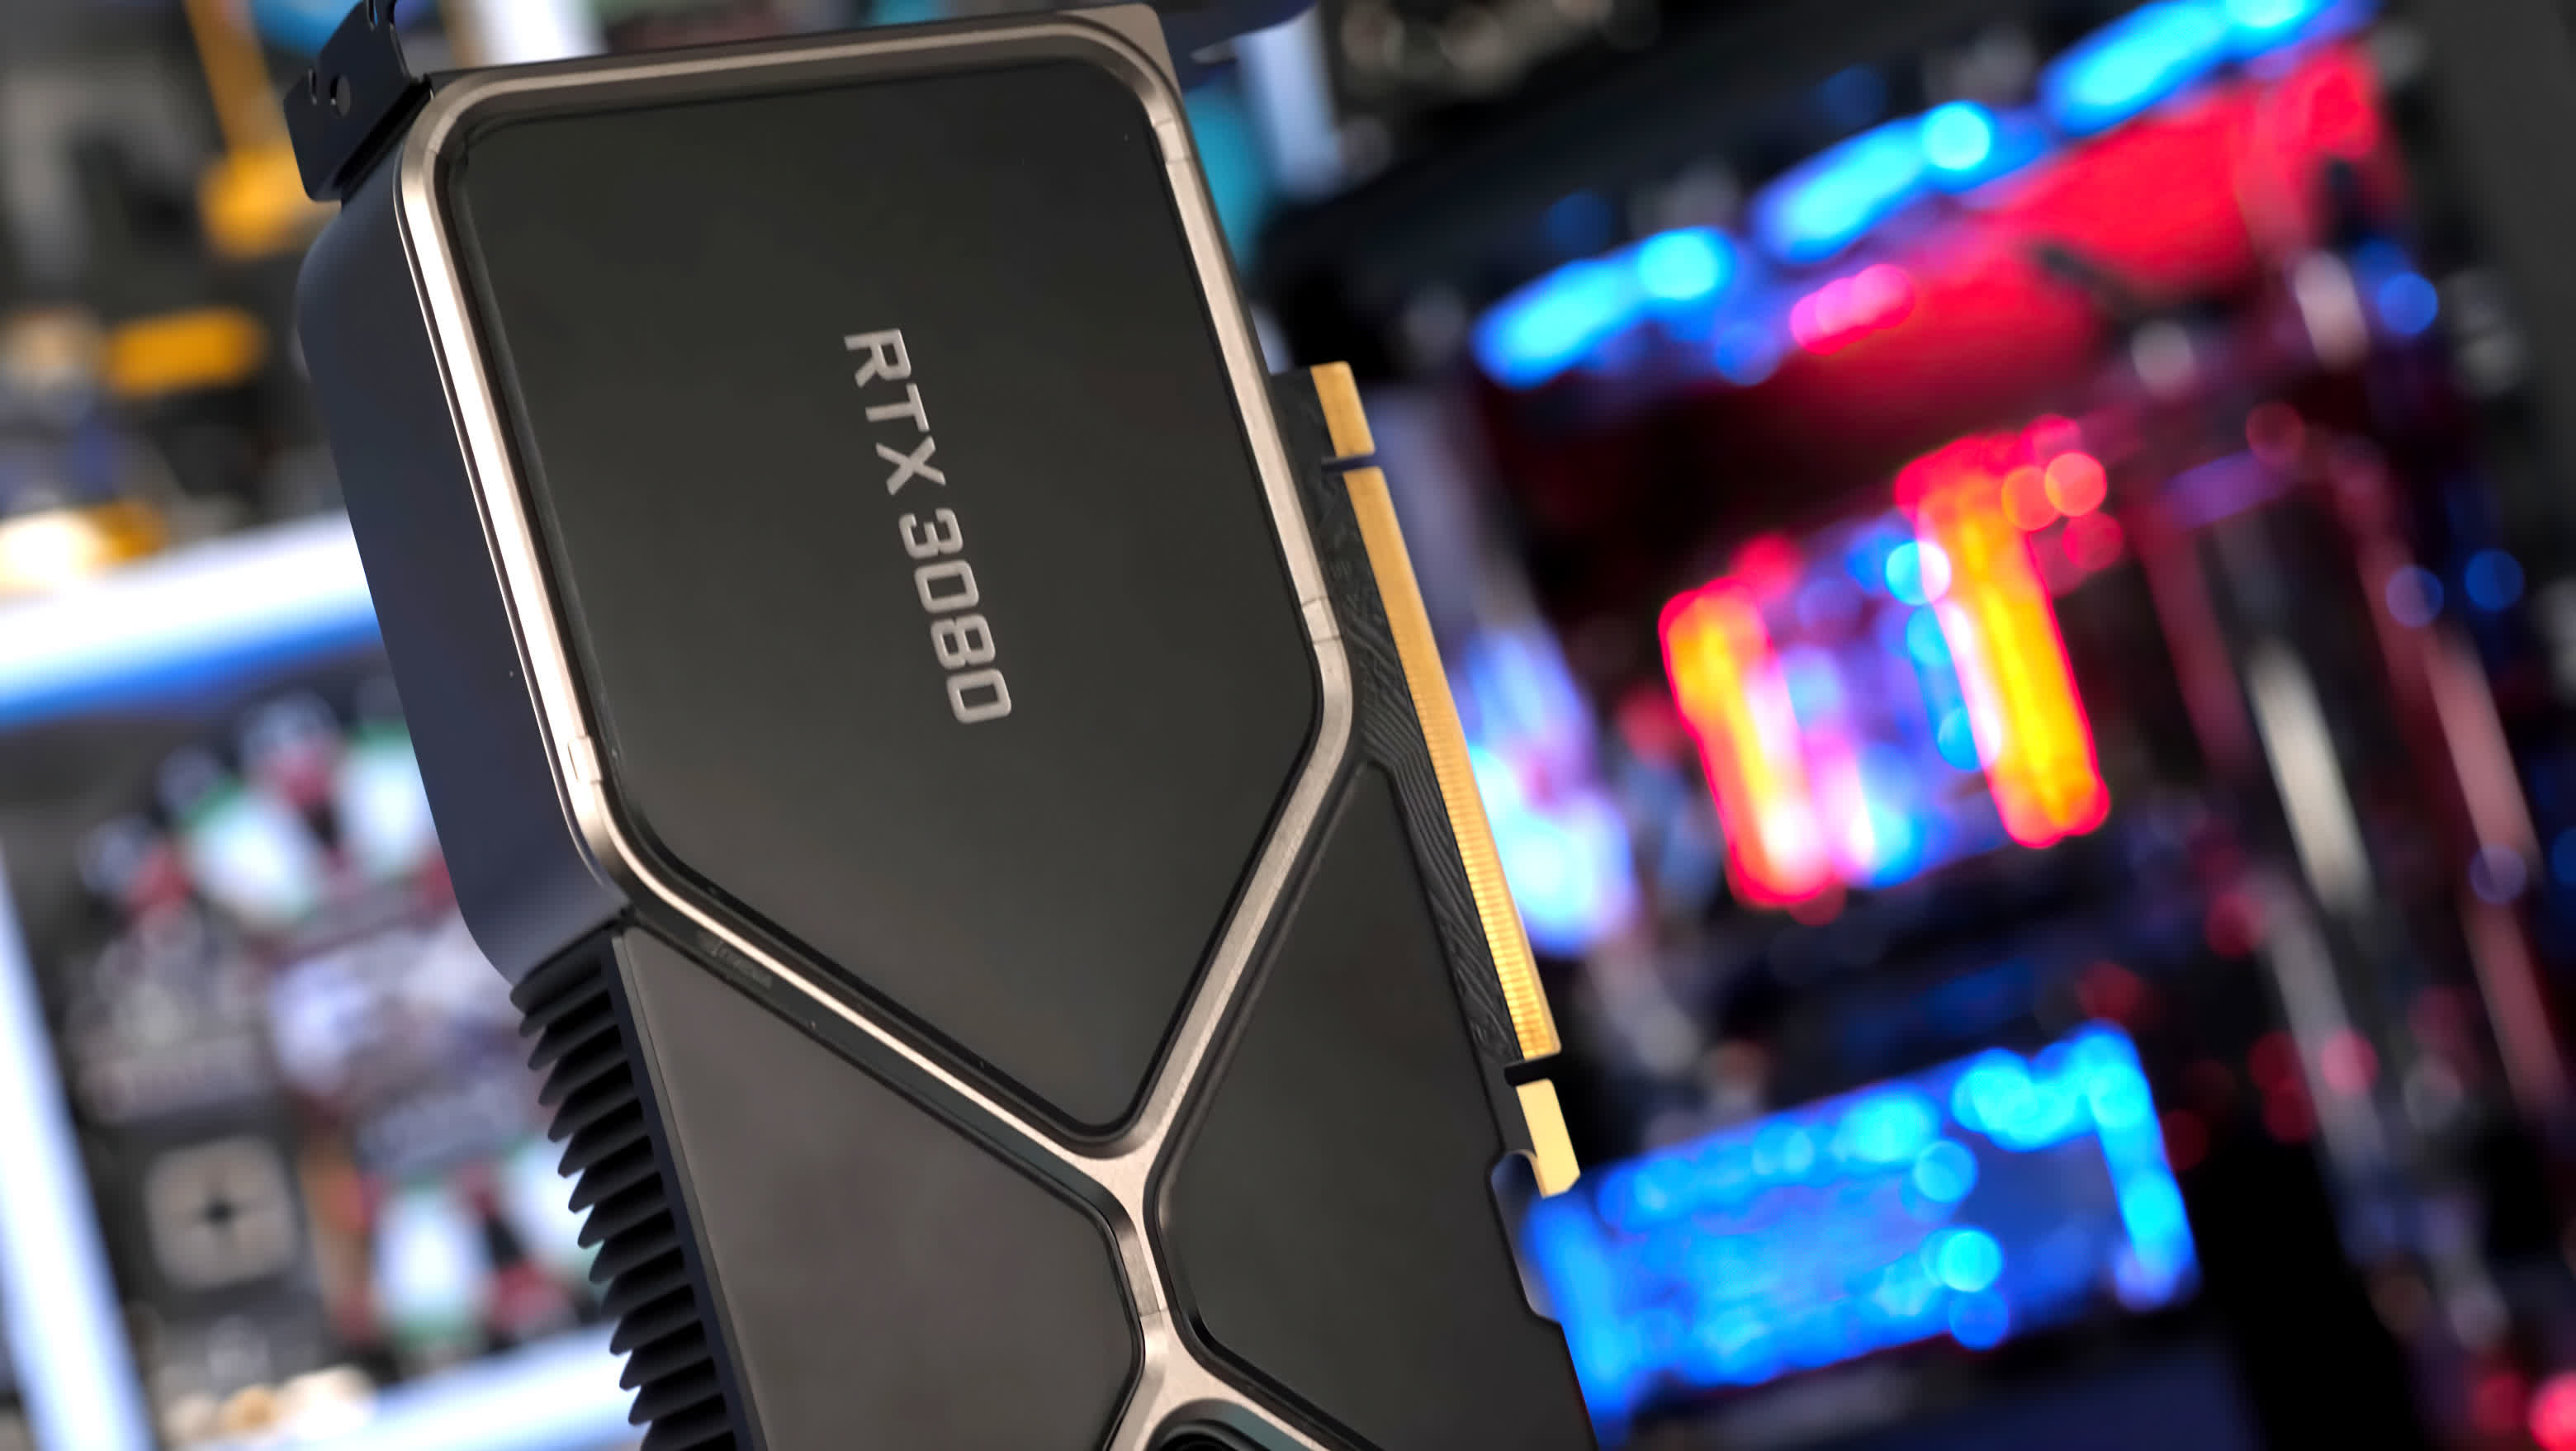 Galax roadmap reveals RTX 3080 with 20GB, RTX 3060 with same performance as RTX 2080